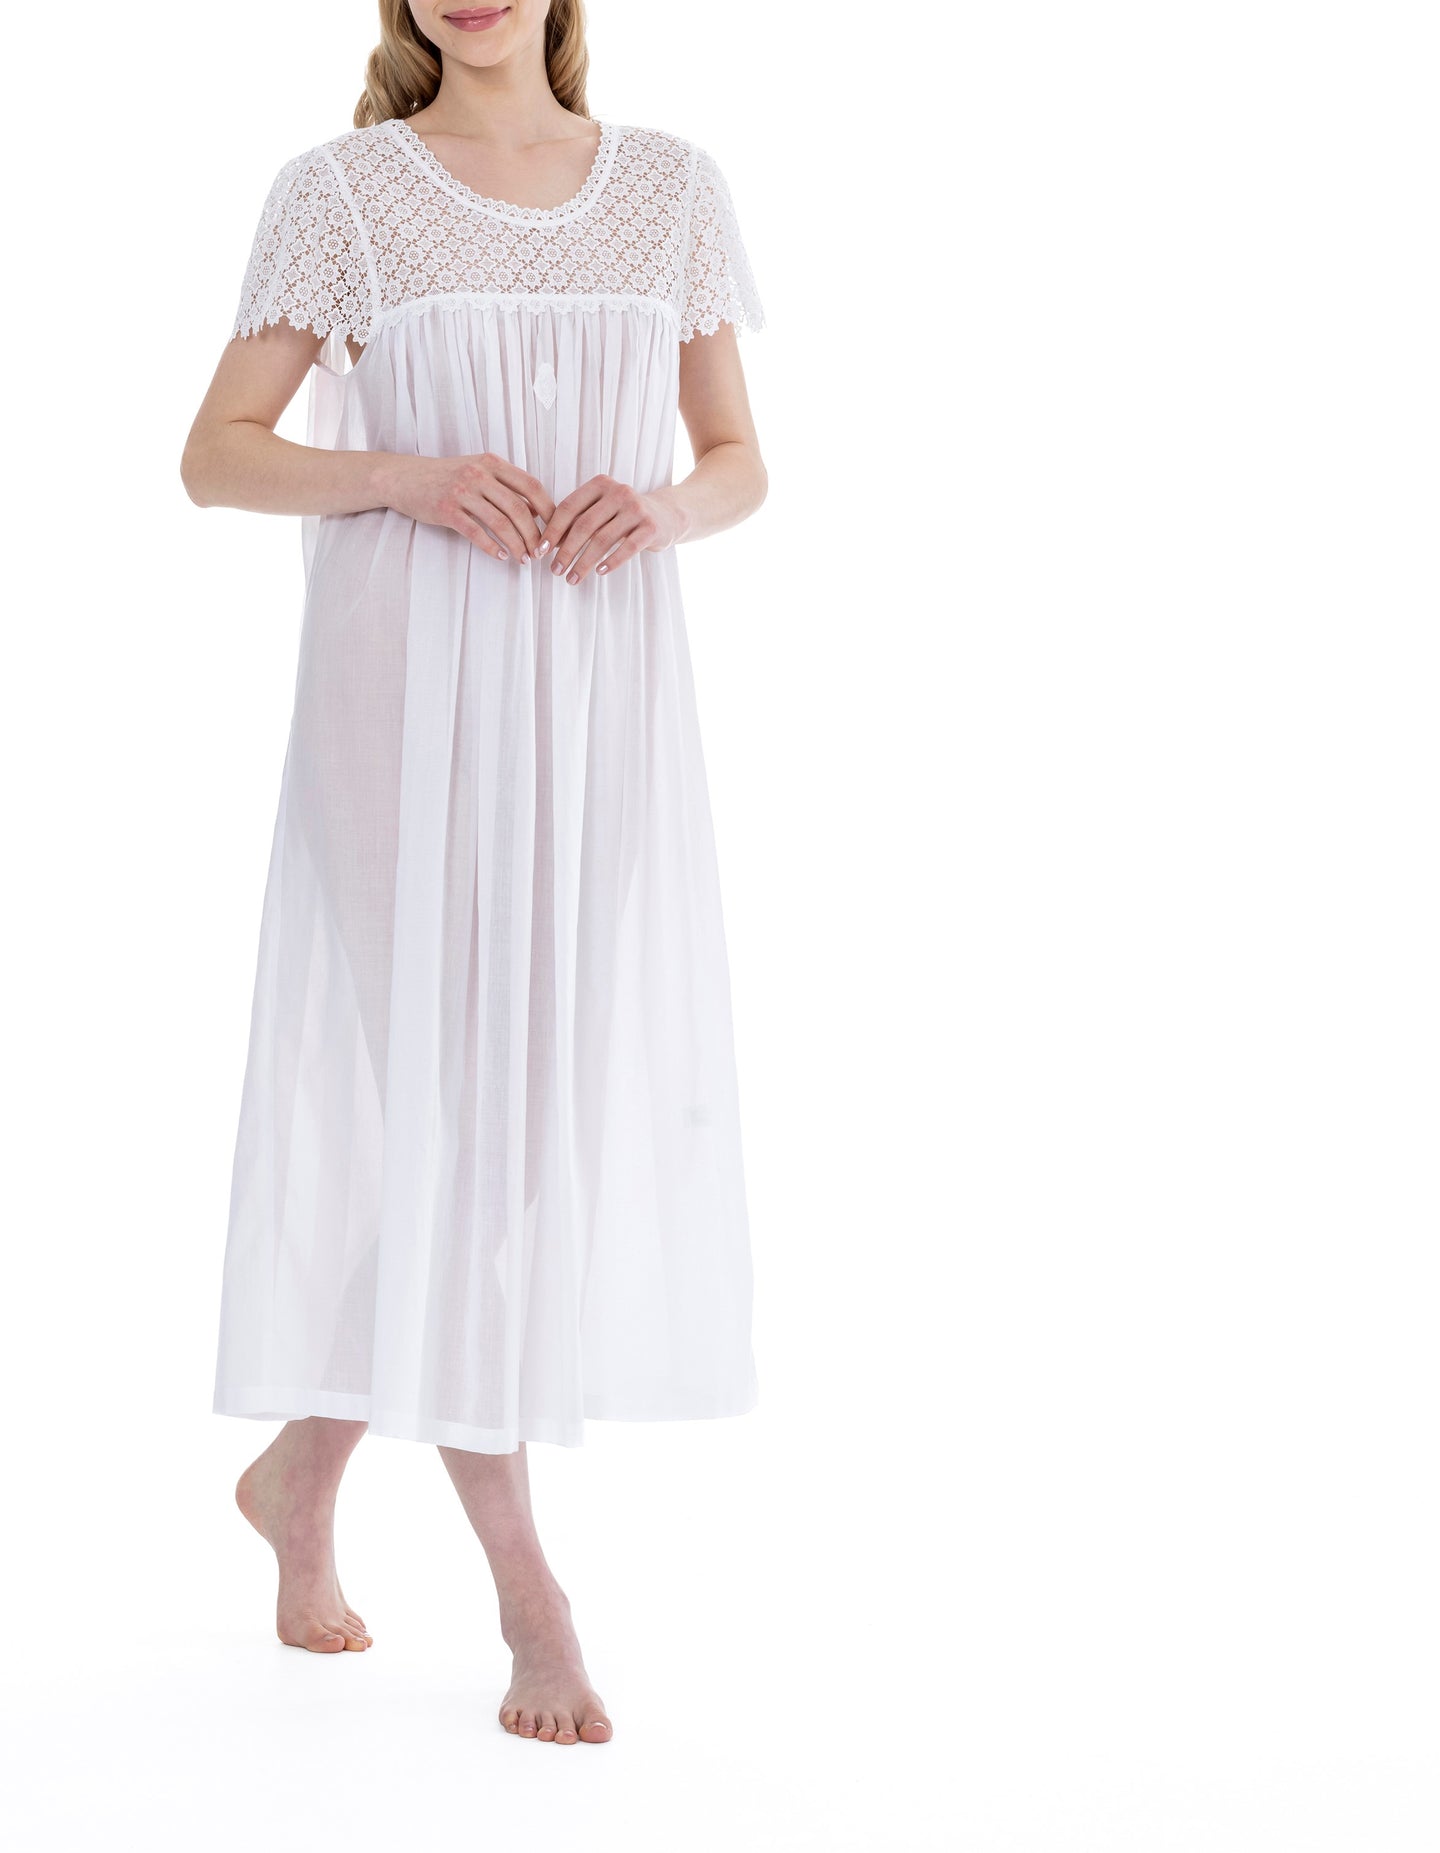 White Full Length (126cm) short sleeve nightgown. Heavy lace throughout the bodice. on the gently rounded neckline and short sleeve. Flared skirt for ease of movement when sleeping. Made in Germany from the finest pure Swiss cotton, Celestine nightdresses are diaphanous, offering perfect sleep without heaviness. Celestine nightwear, dressing gowns and short robes drop from the shoulder, therefore one size fits all.  Fabric composition:  100% Pure Swiss Cotton. 100% Guipure Cotton Lace. Machine Washable.